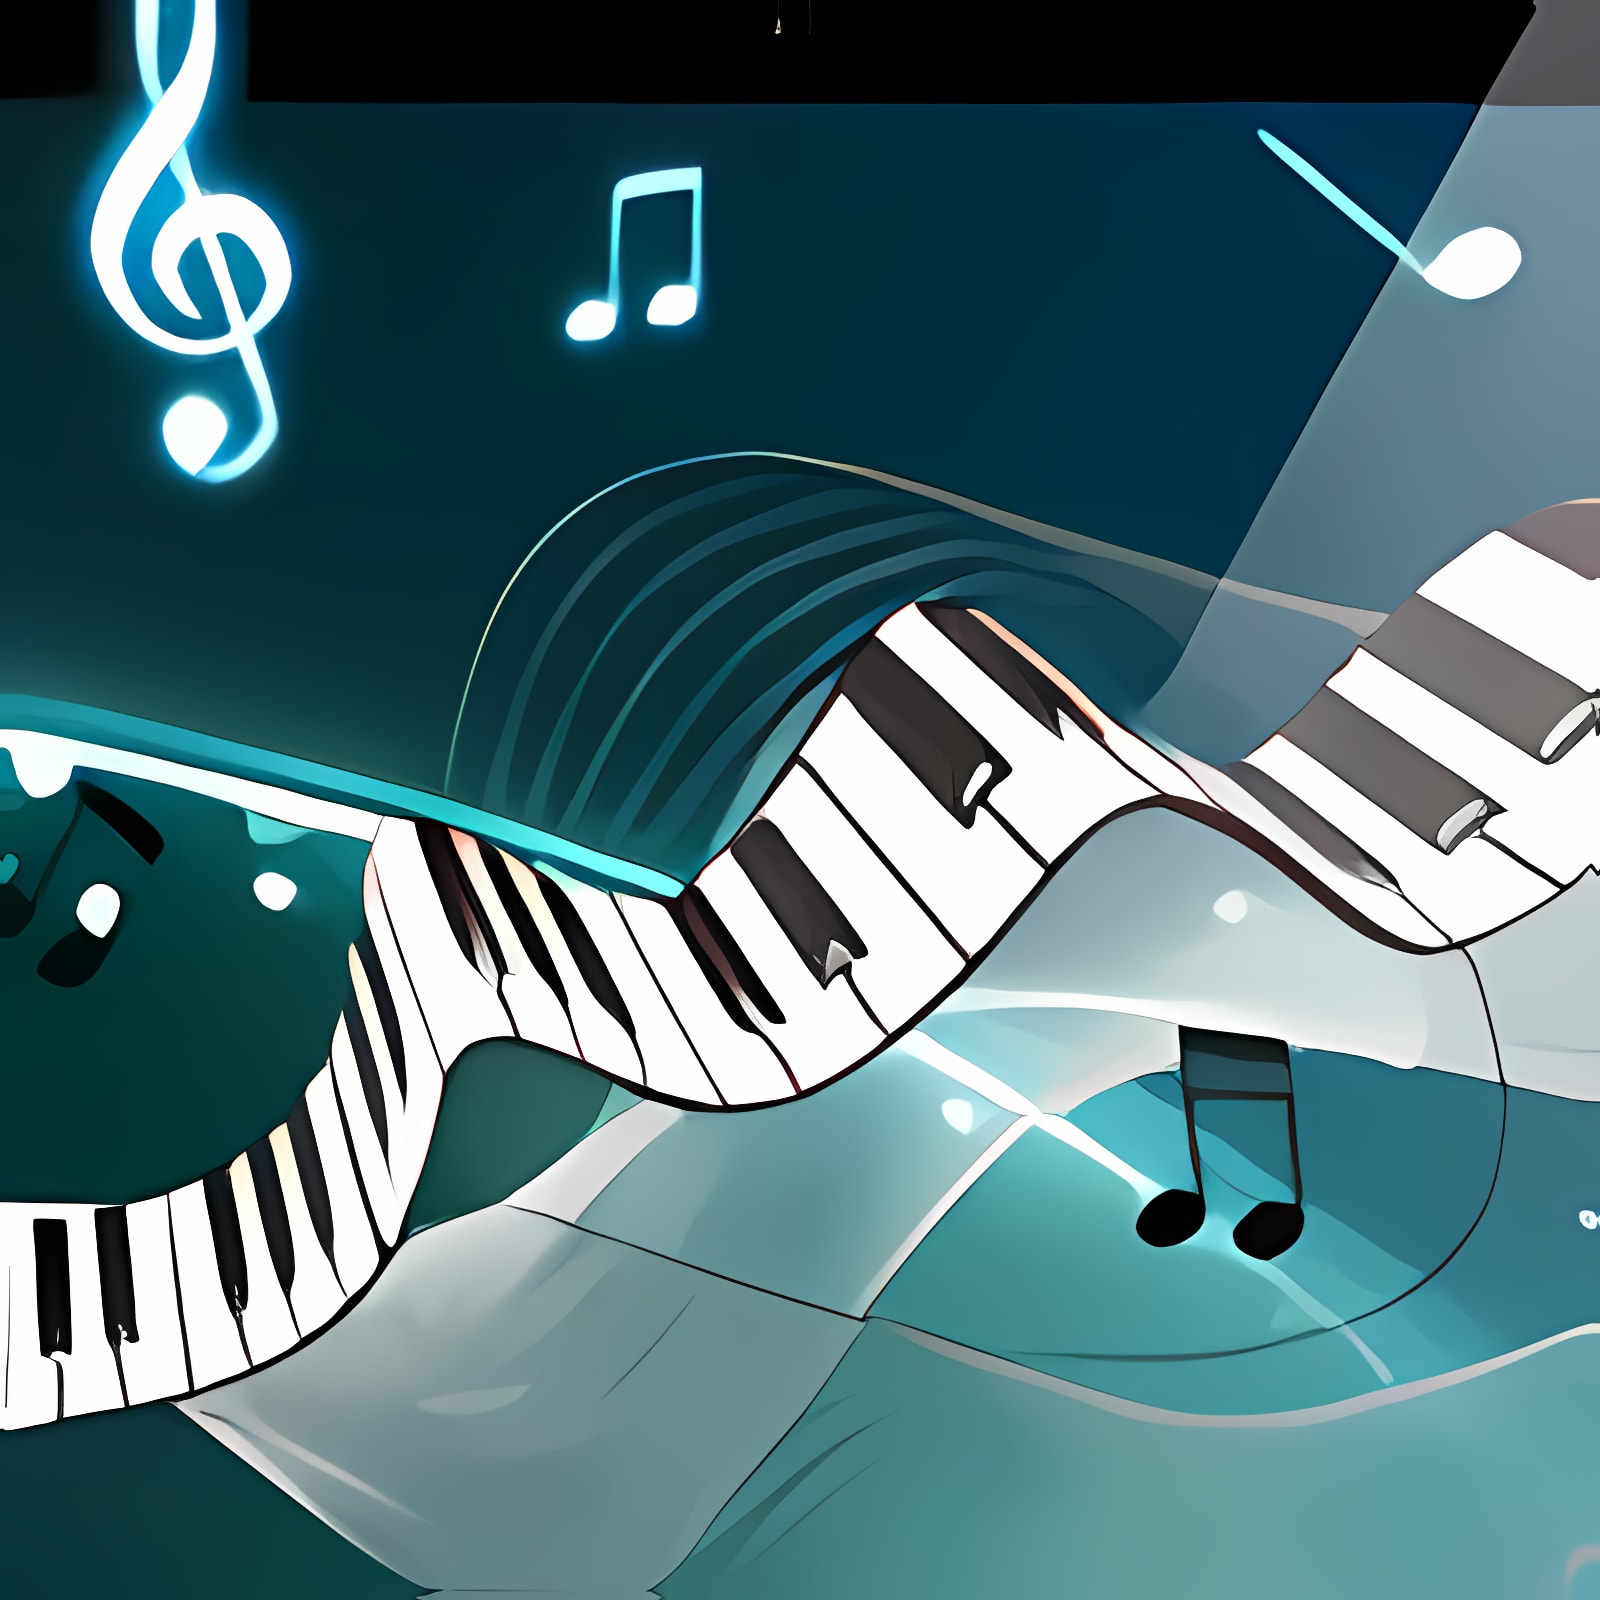 instal the new for windows Everyone Piano 2.5.7.28